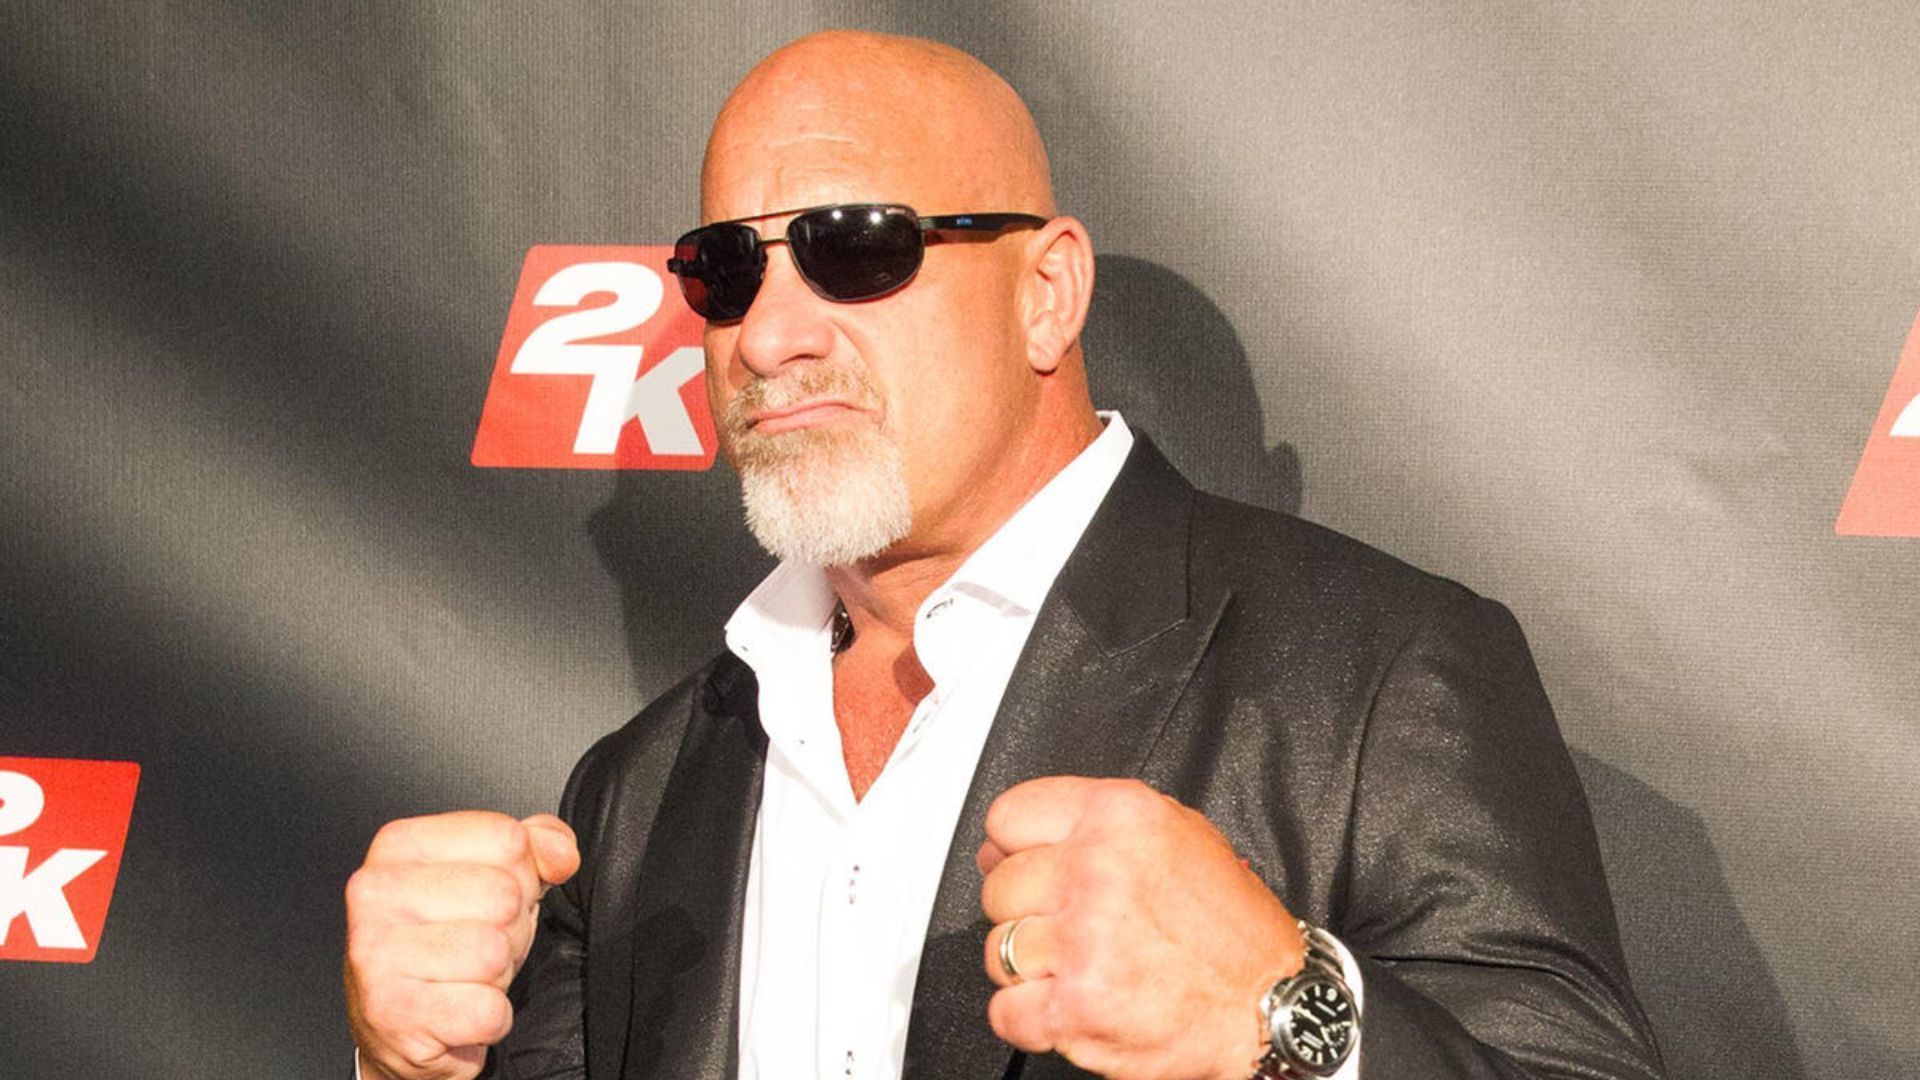 Goldberg is one of the most dominant superstars in WWE history